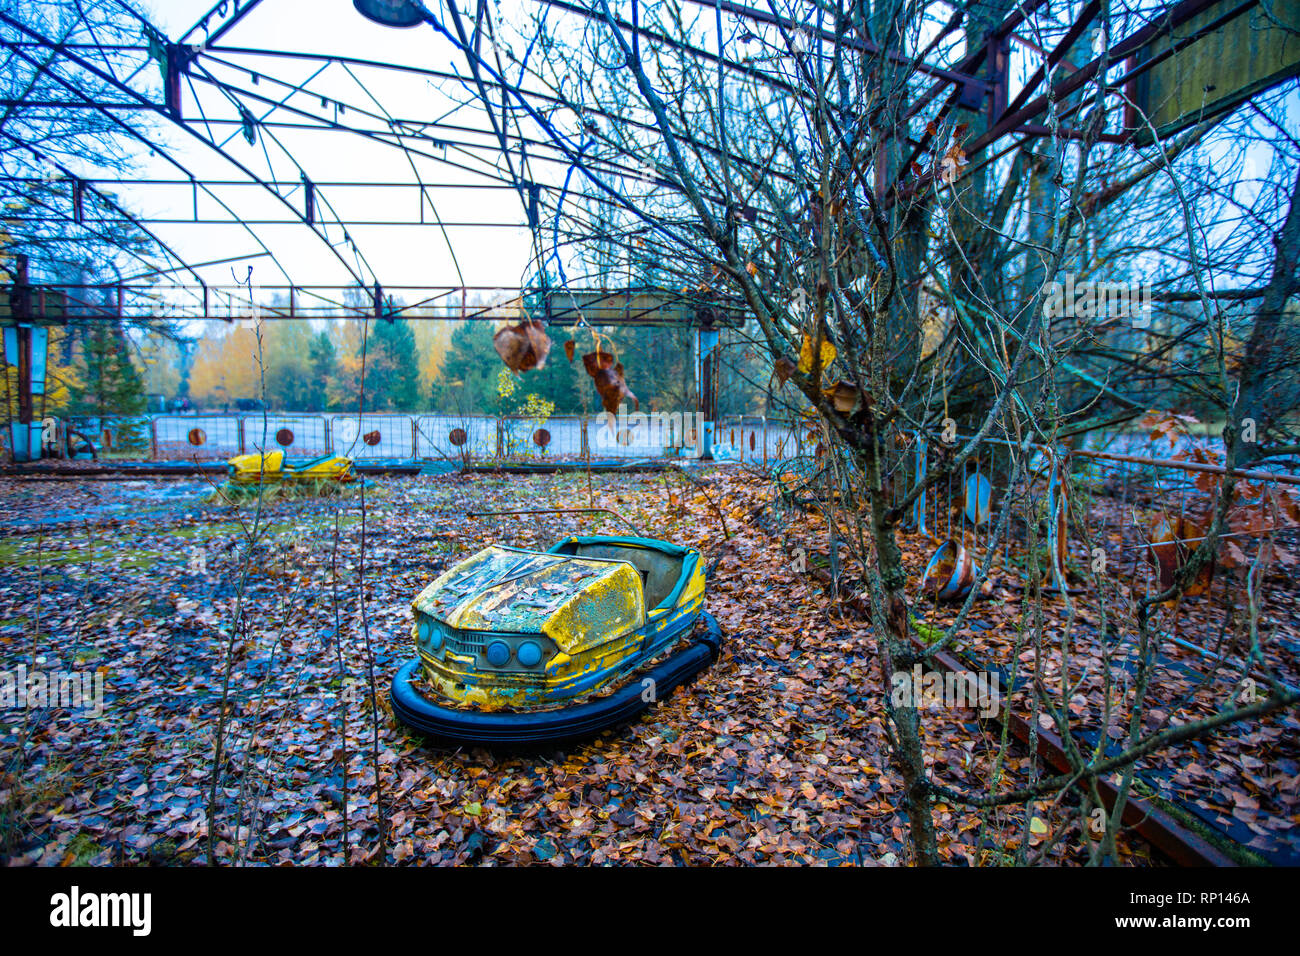 Bumper cars in the evacuated town Pripyat inside the exclusion zone, Chernobyl, Ukraine Stock Photo